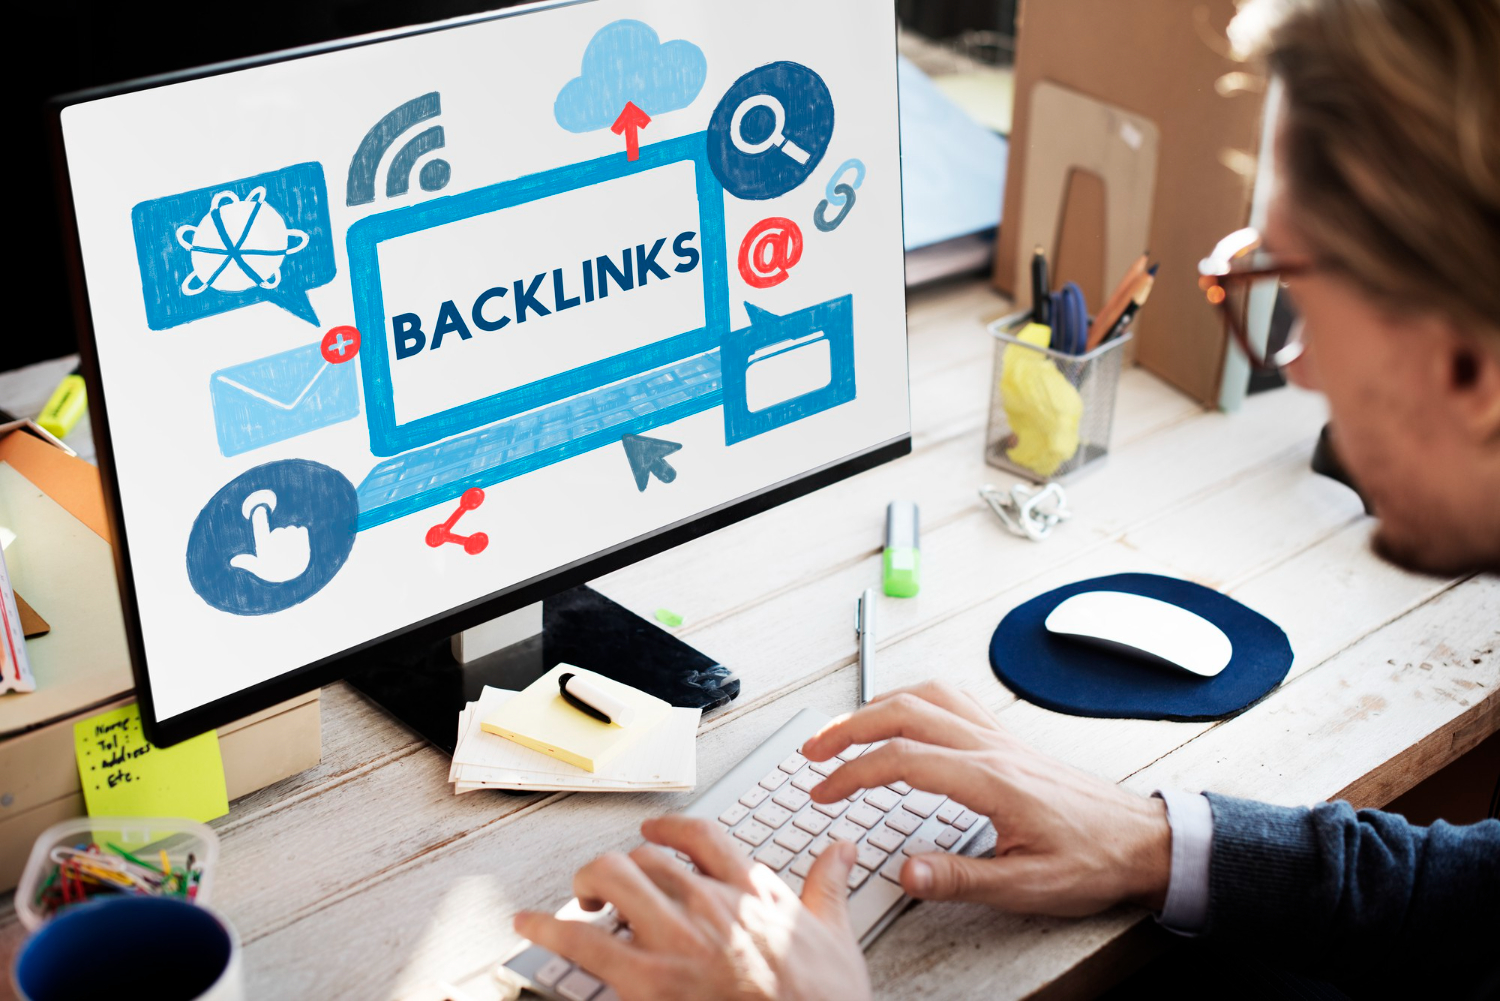 What is the maximum number of backlinks that Google considers Bad